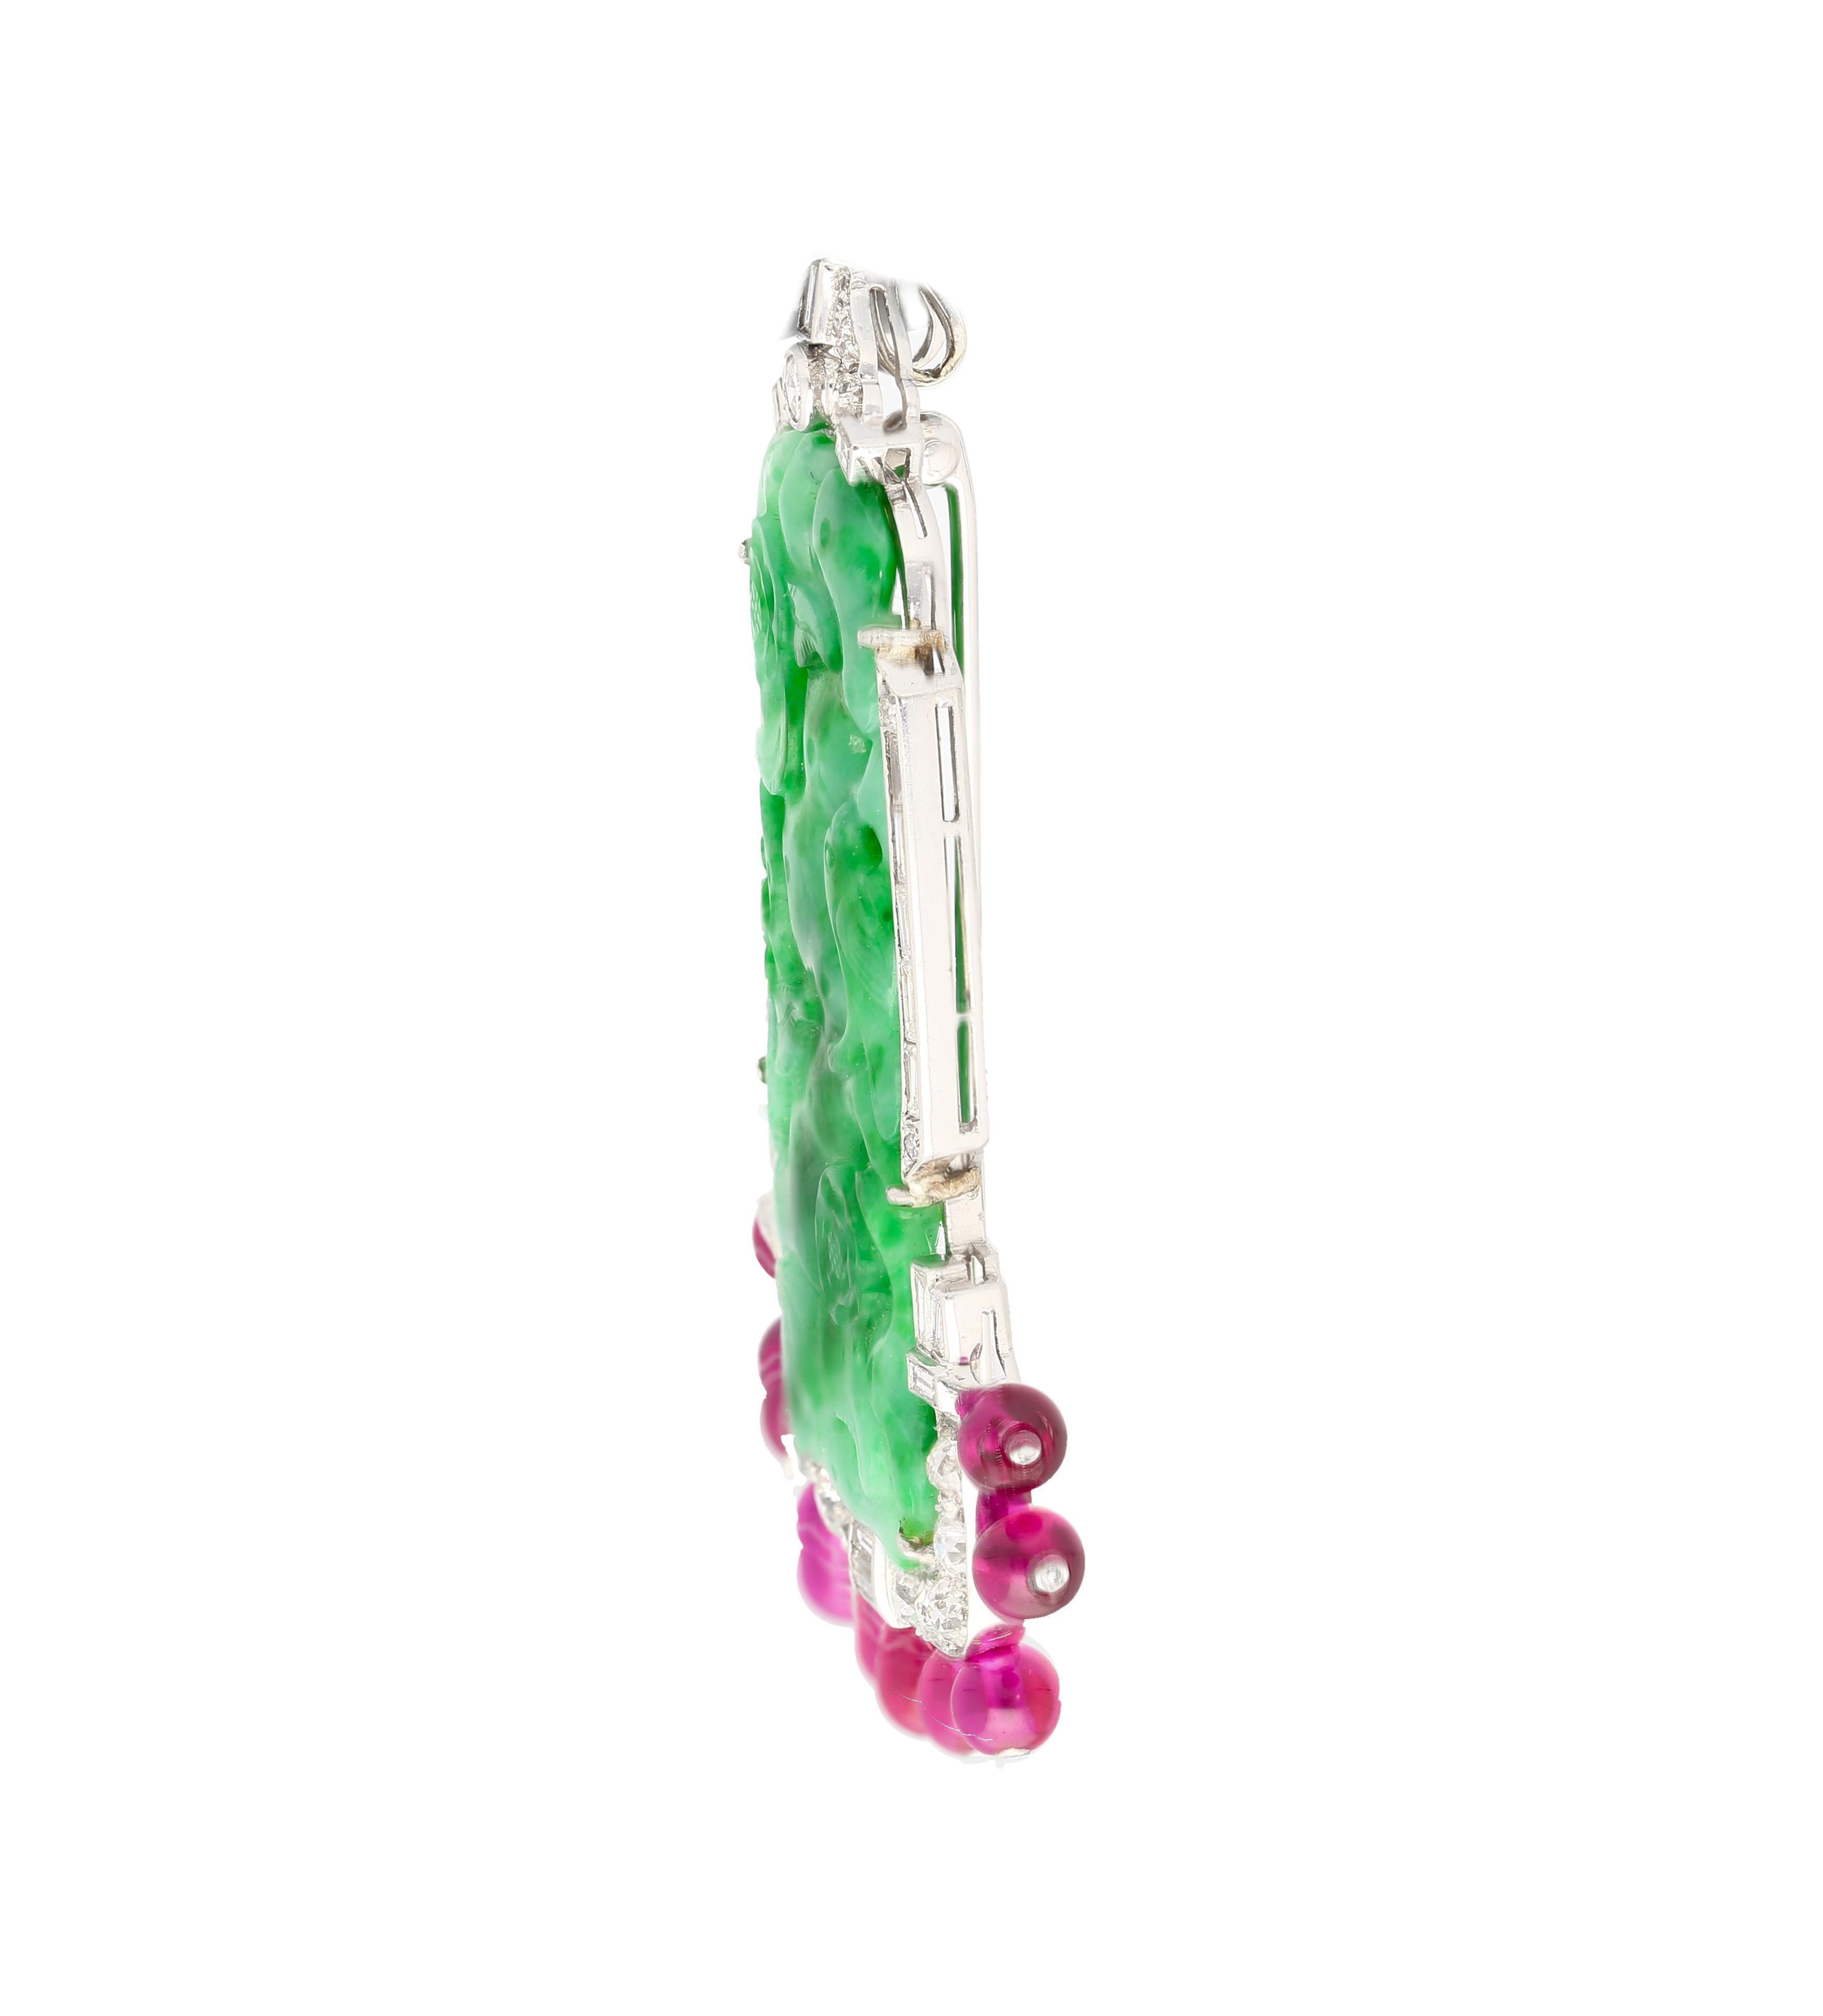 Jade and Diamond Pin with Ruby Beads in Platinum Pin. 

An artistic masterpiece, this pin features a prong set carved jadeite jade center stone. The jade is carved with holes and detailed texturing. It is paired with baguette, round, and fancy-cut